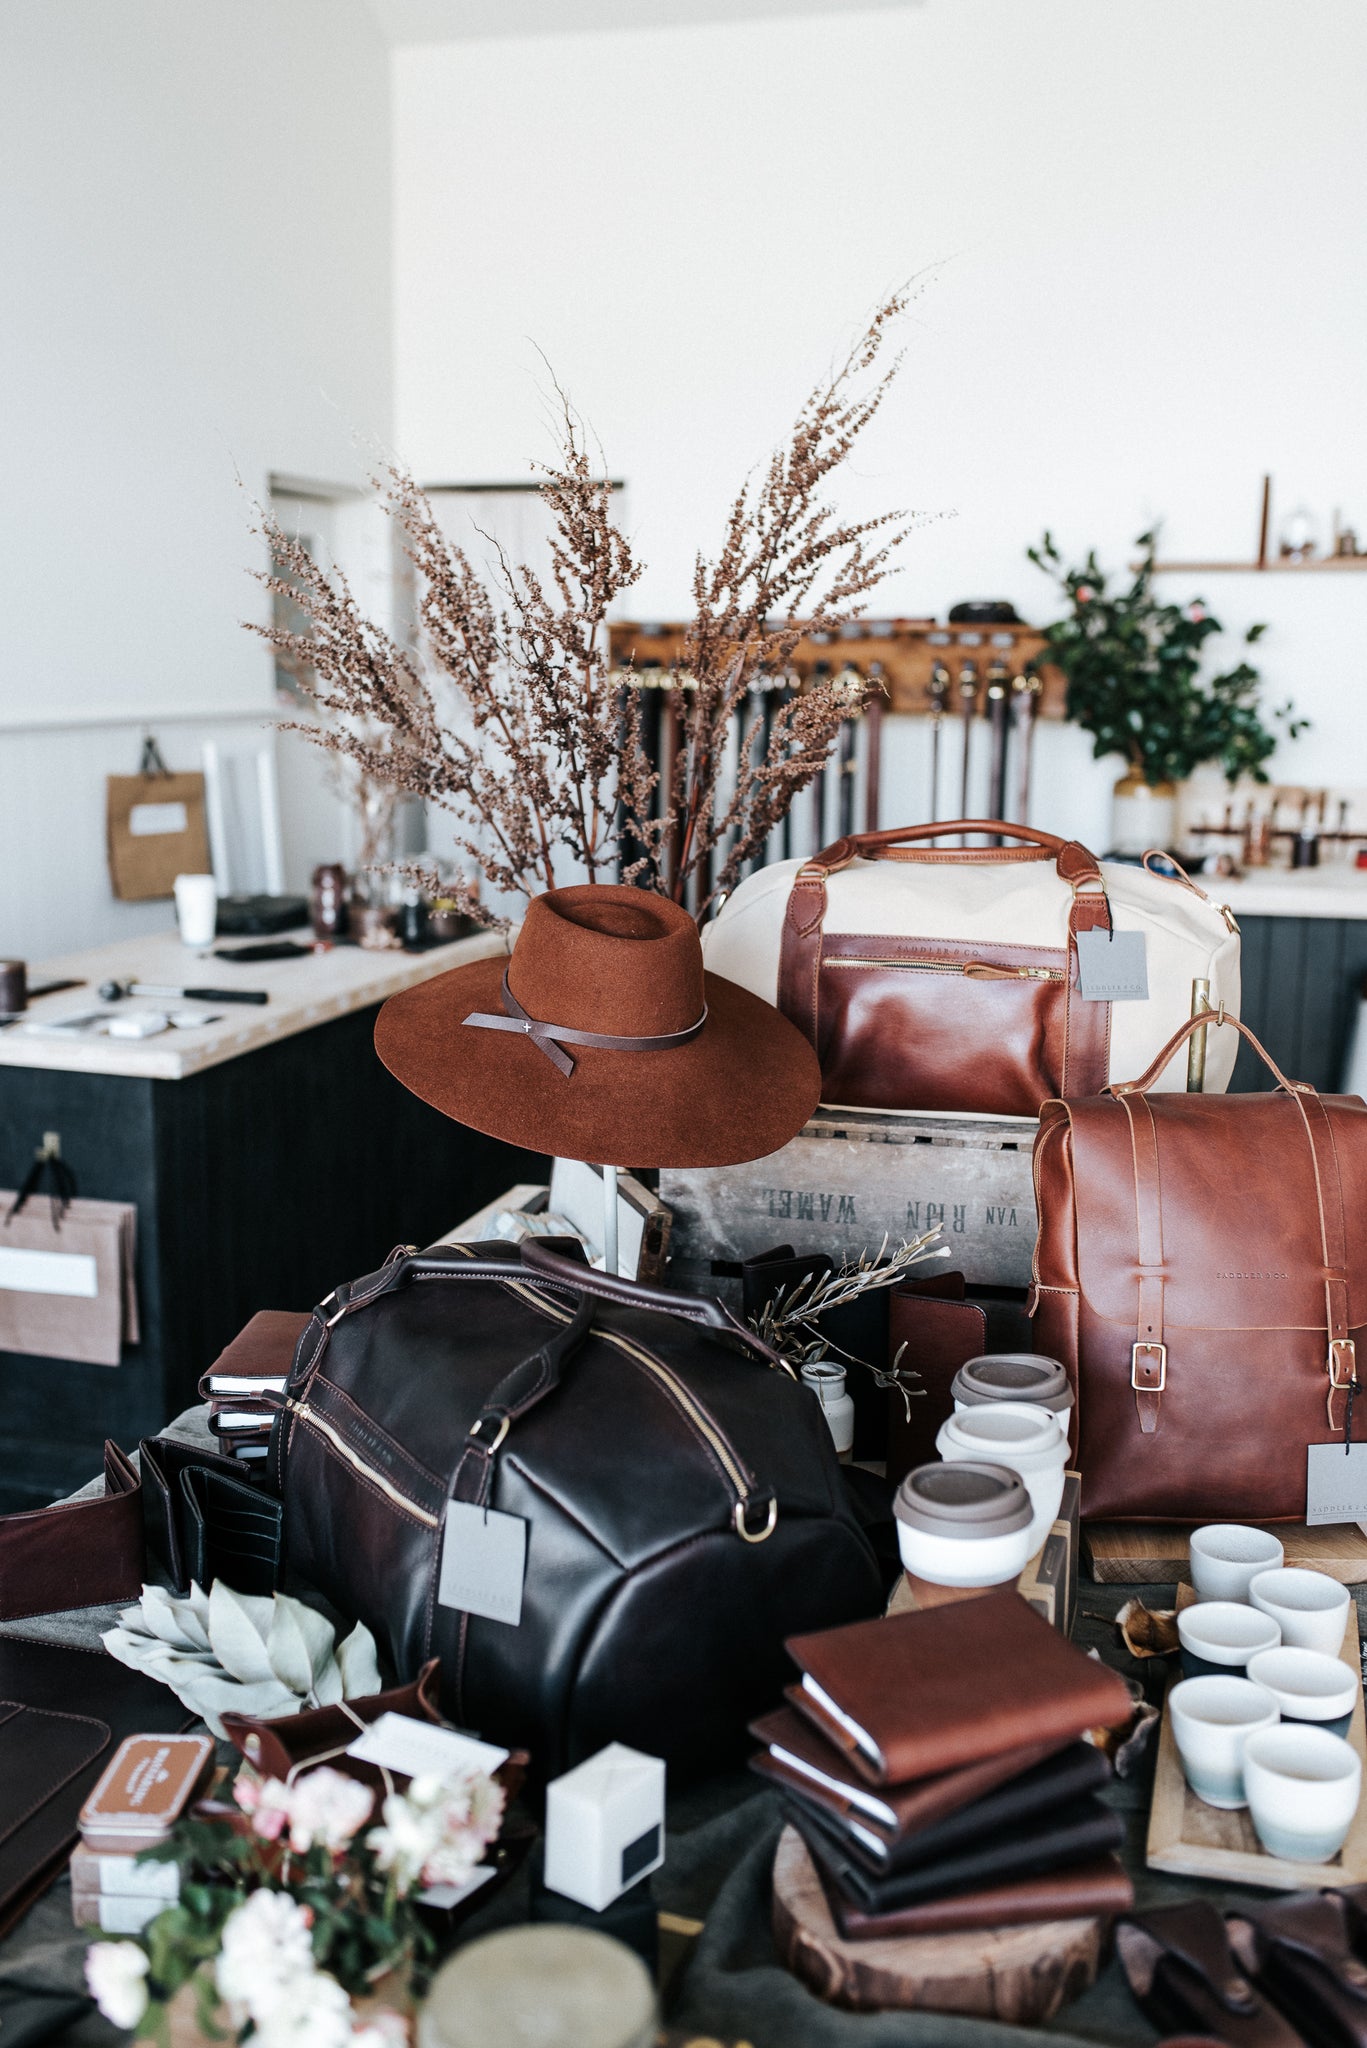 leather goods, artisan wares in the Saddler & Co popup shop